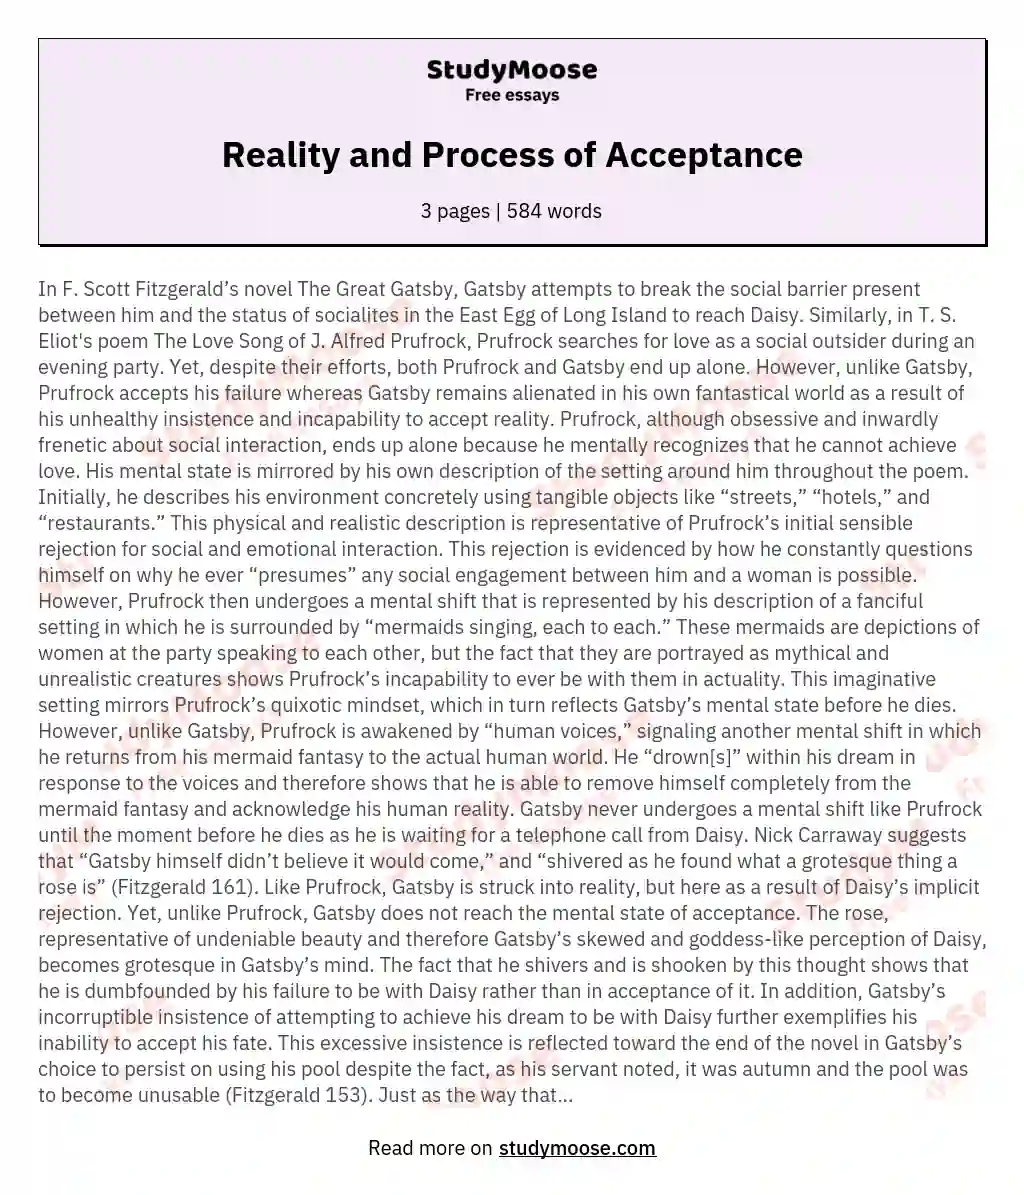 Reality and Process of Acceptance essay